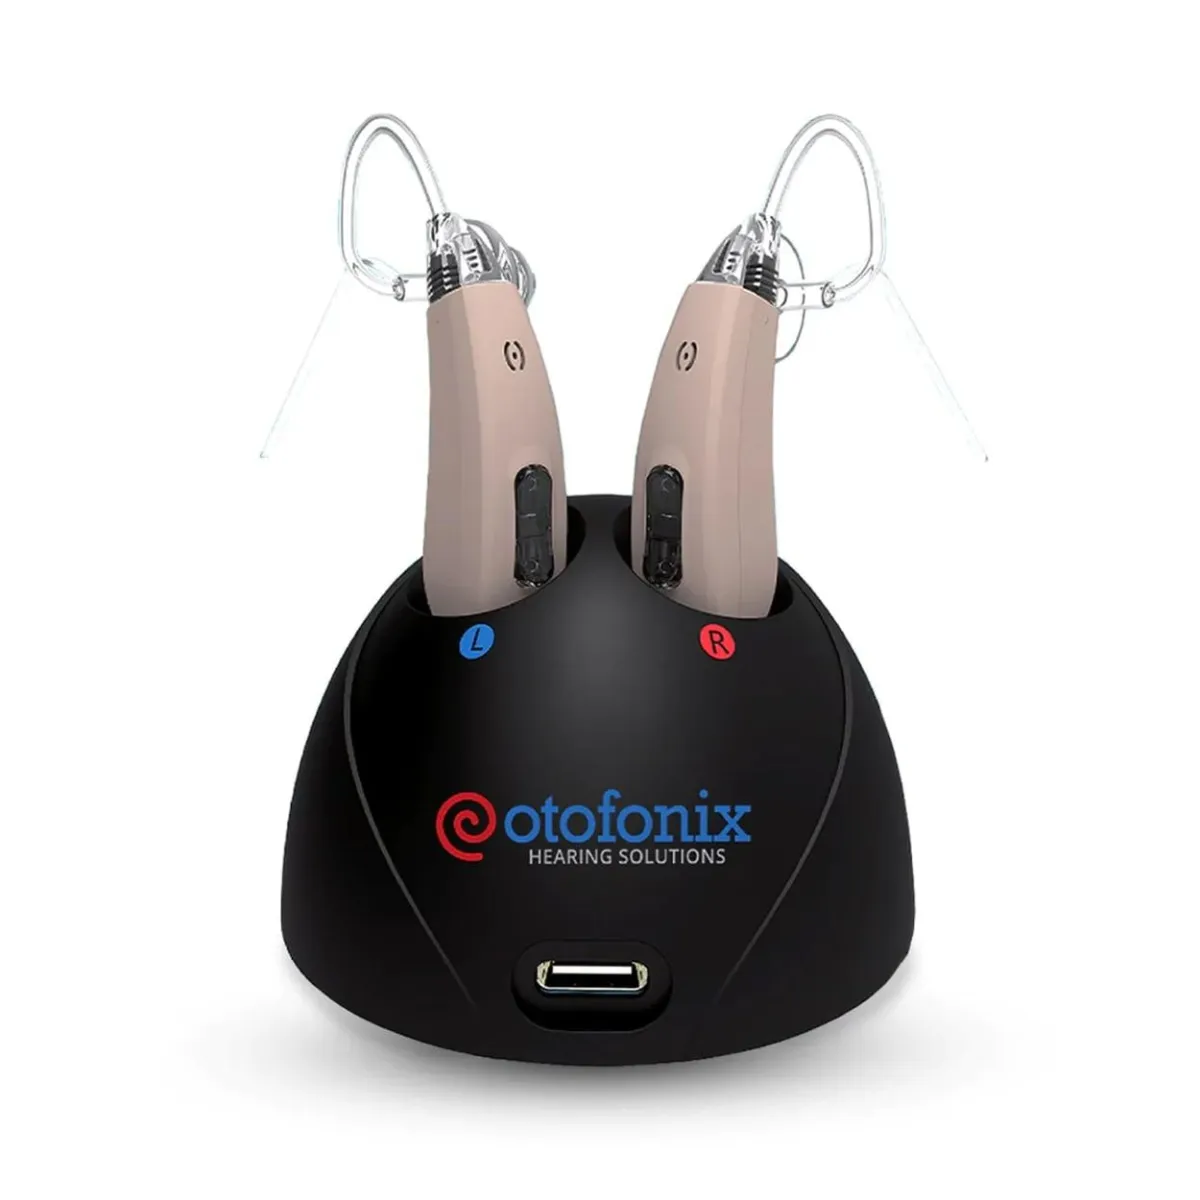 Otofonix Hearing Aids Sold Direct To The Consumer Mobile Website Image_helix